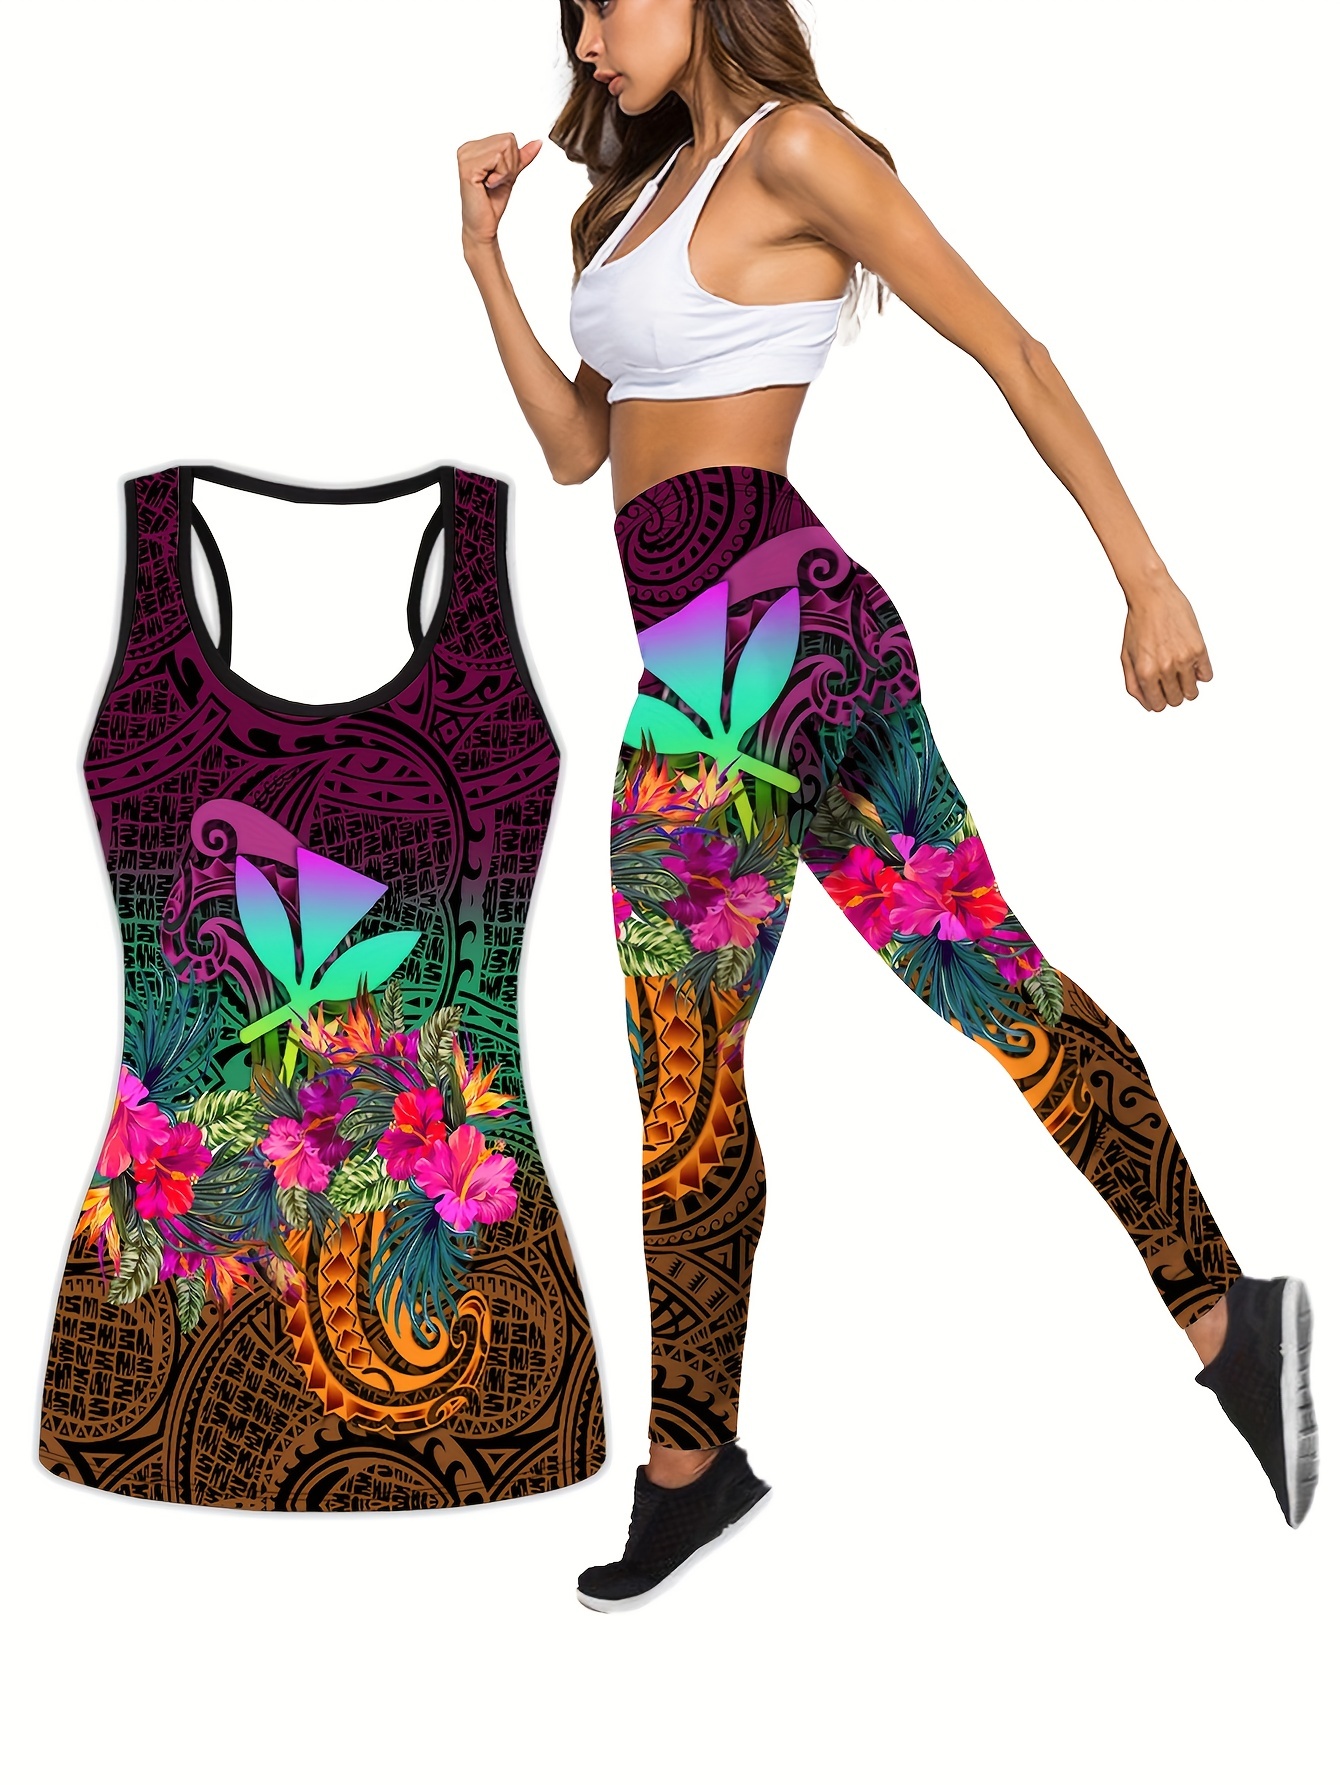 Women Floral Outfits Set Crop Tops Bra + Leggings For Yoga Sports Running